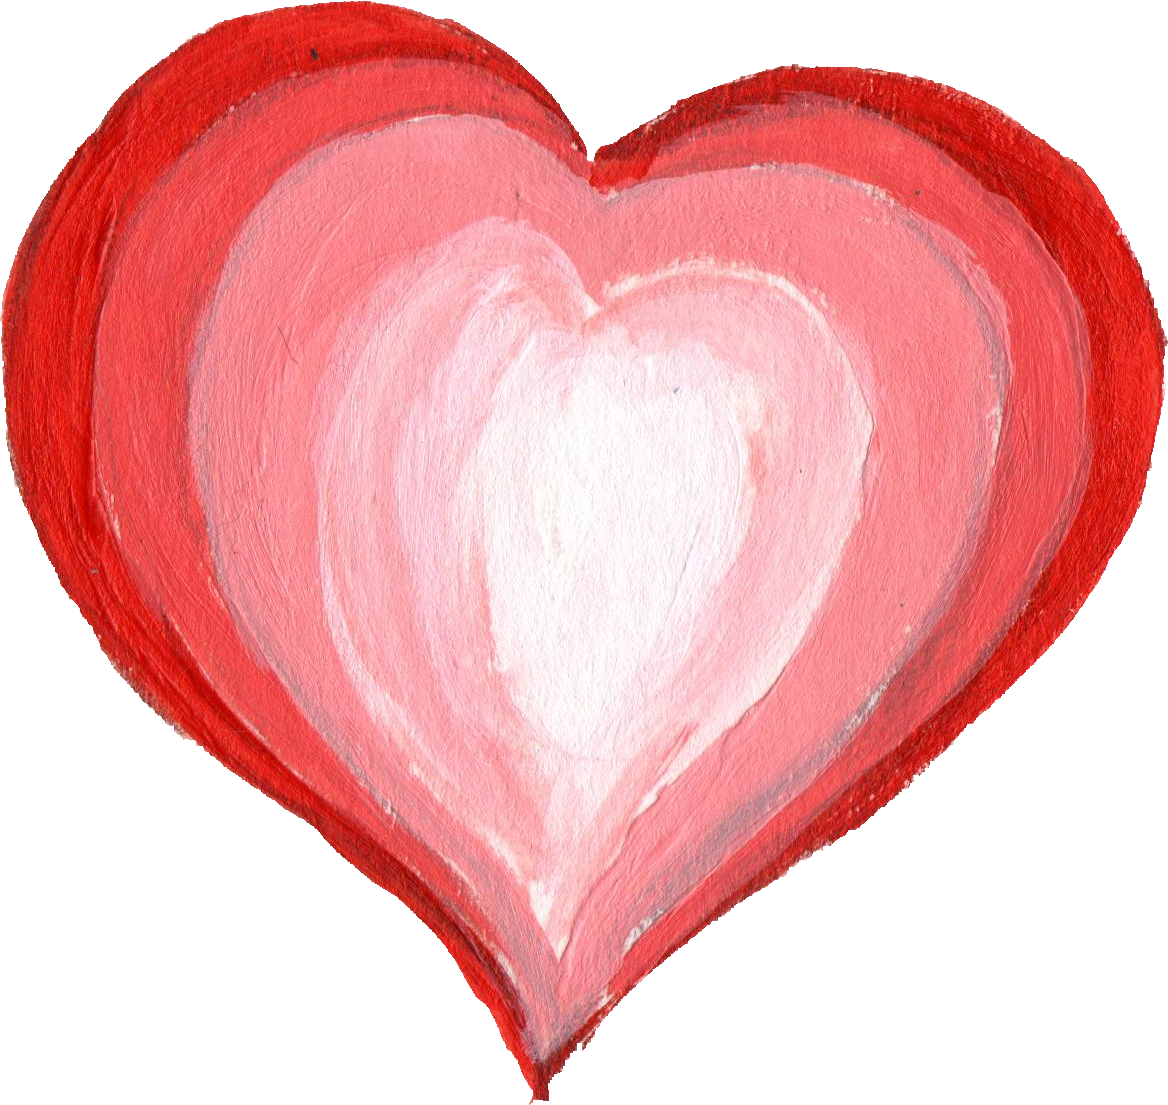 Free Download - Heart Art Png Paint (1168x1105)